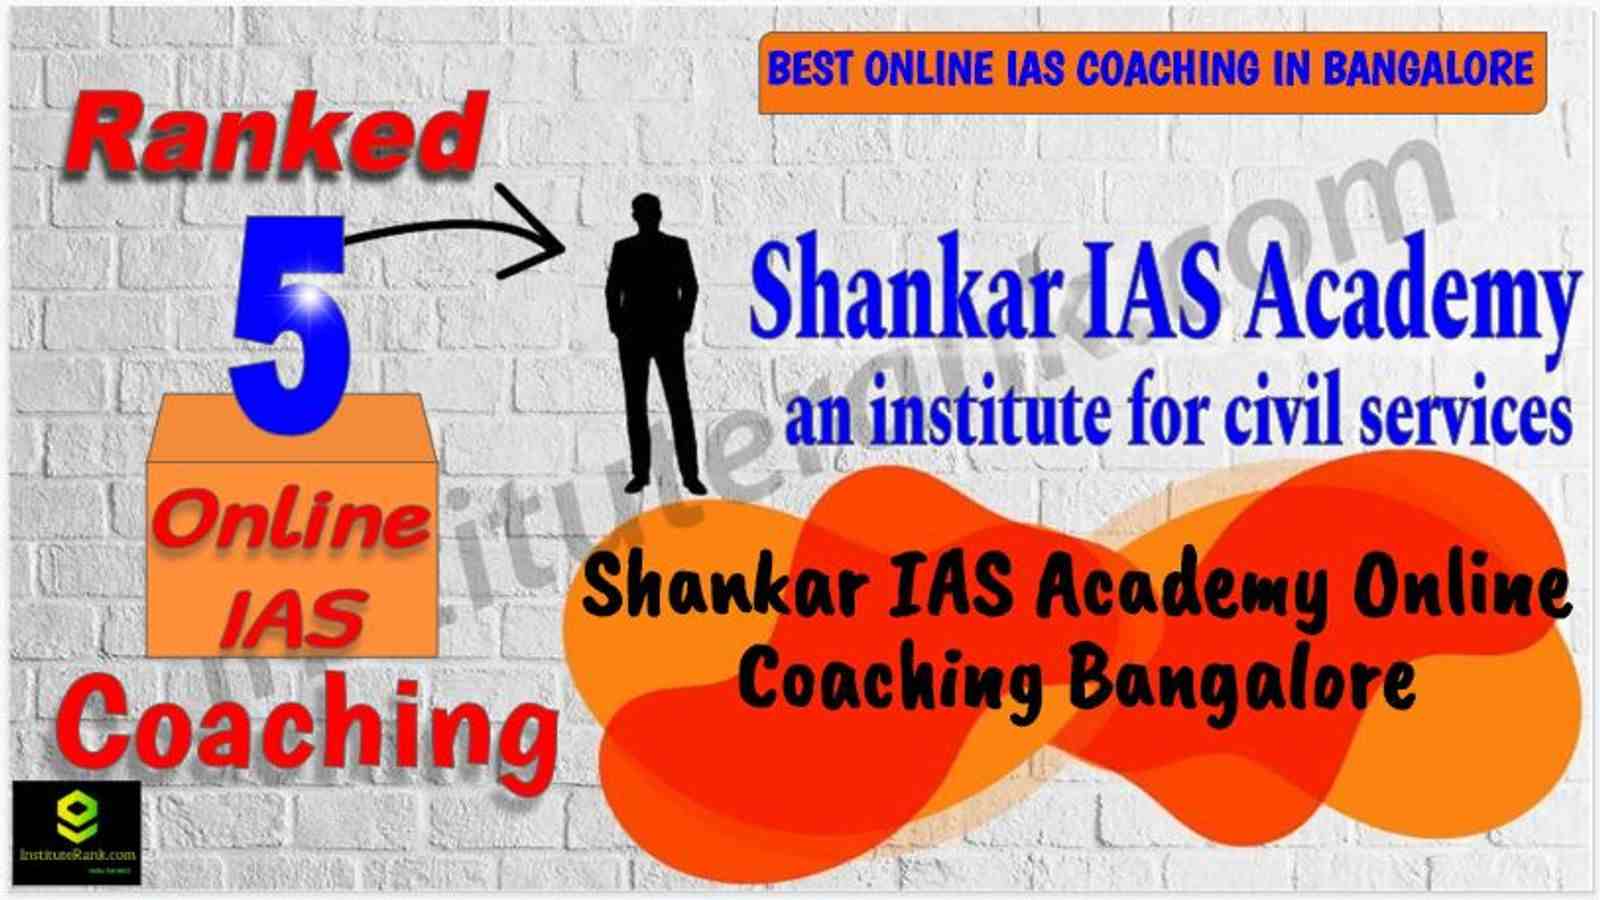 Best Online IAS Coaching in Bangalore